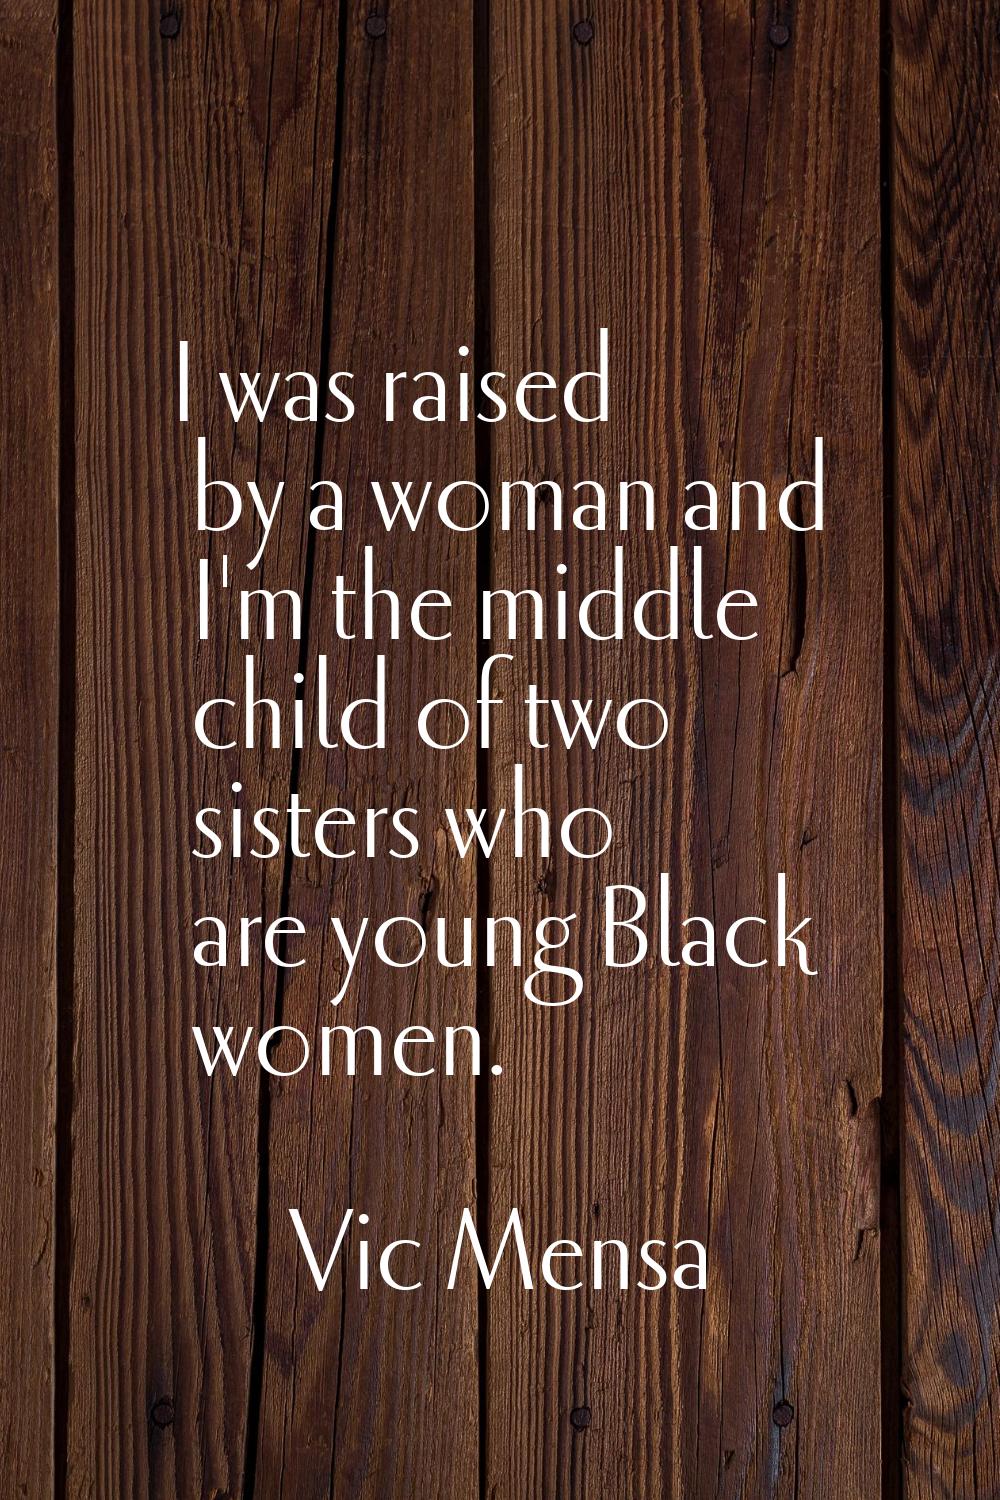 I was raised by a woman and I'm the middle child of two sisters who are young Black women.